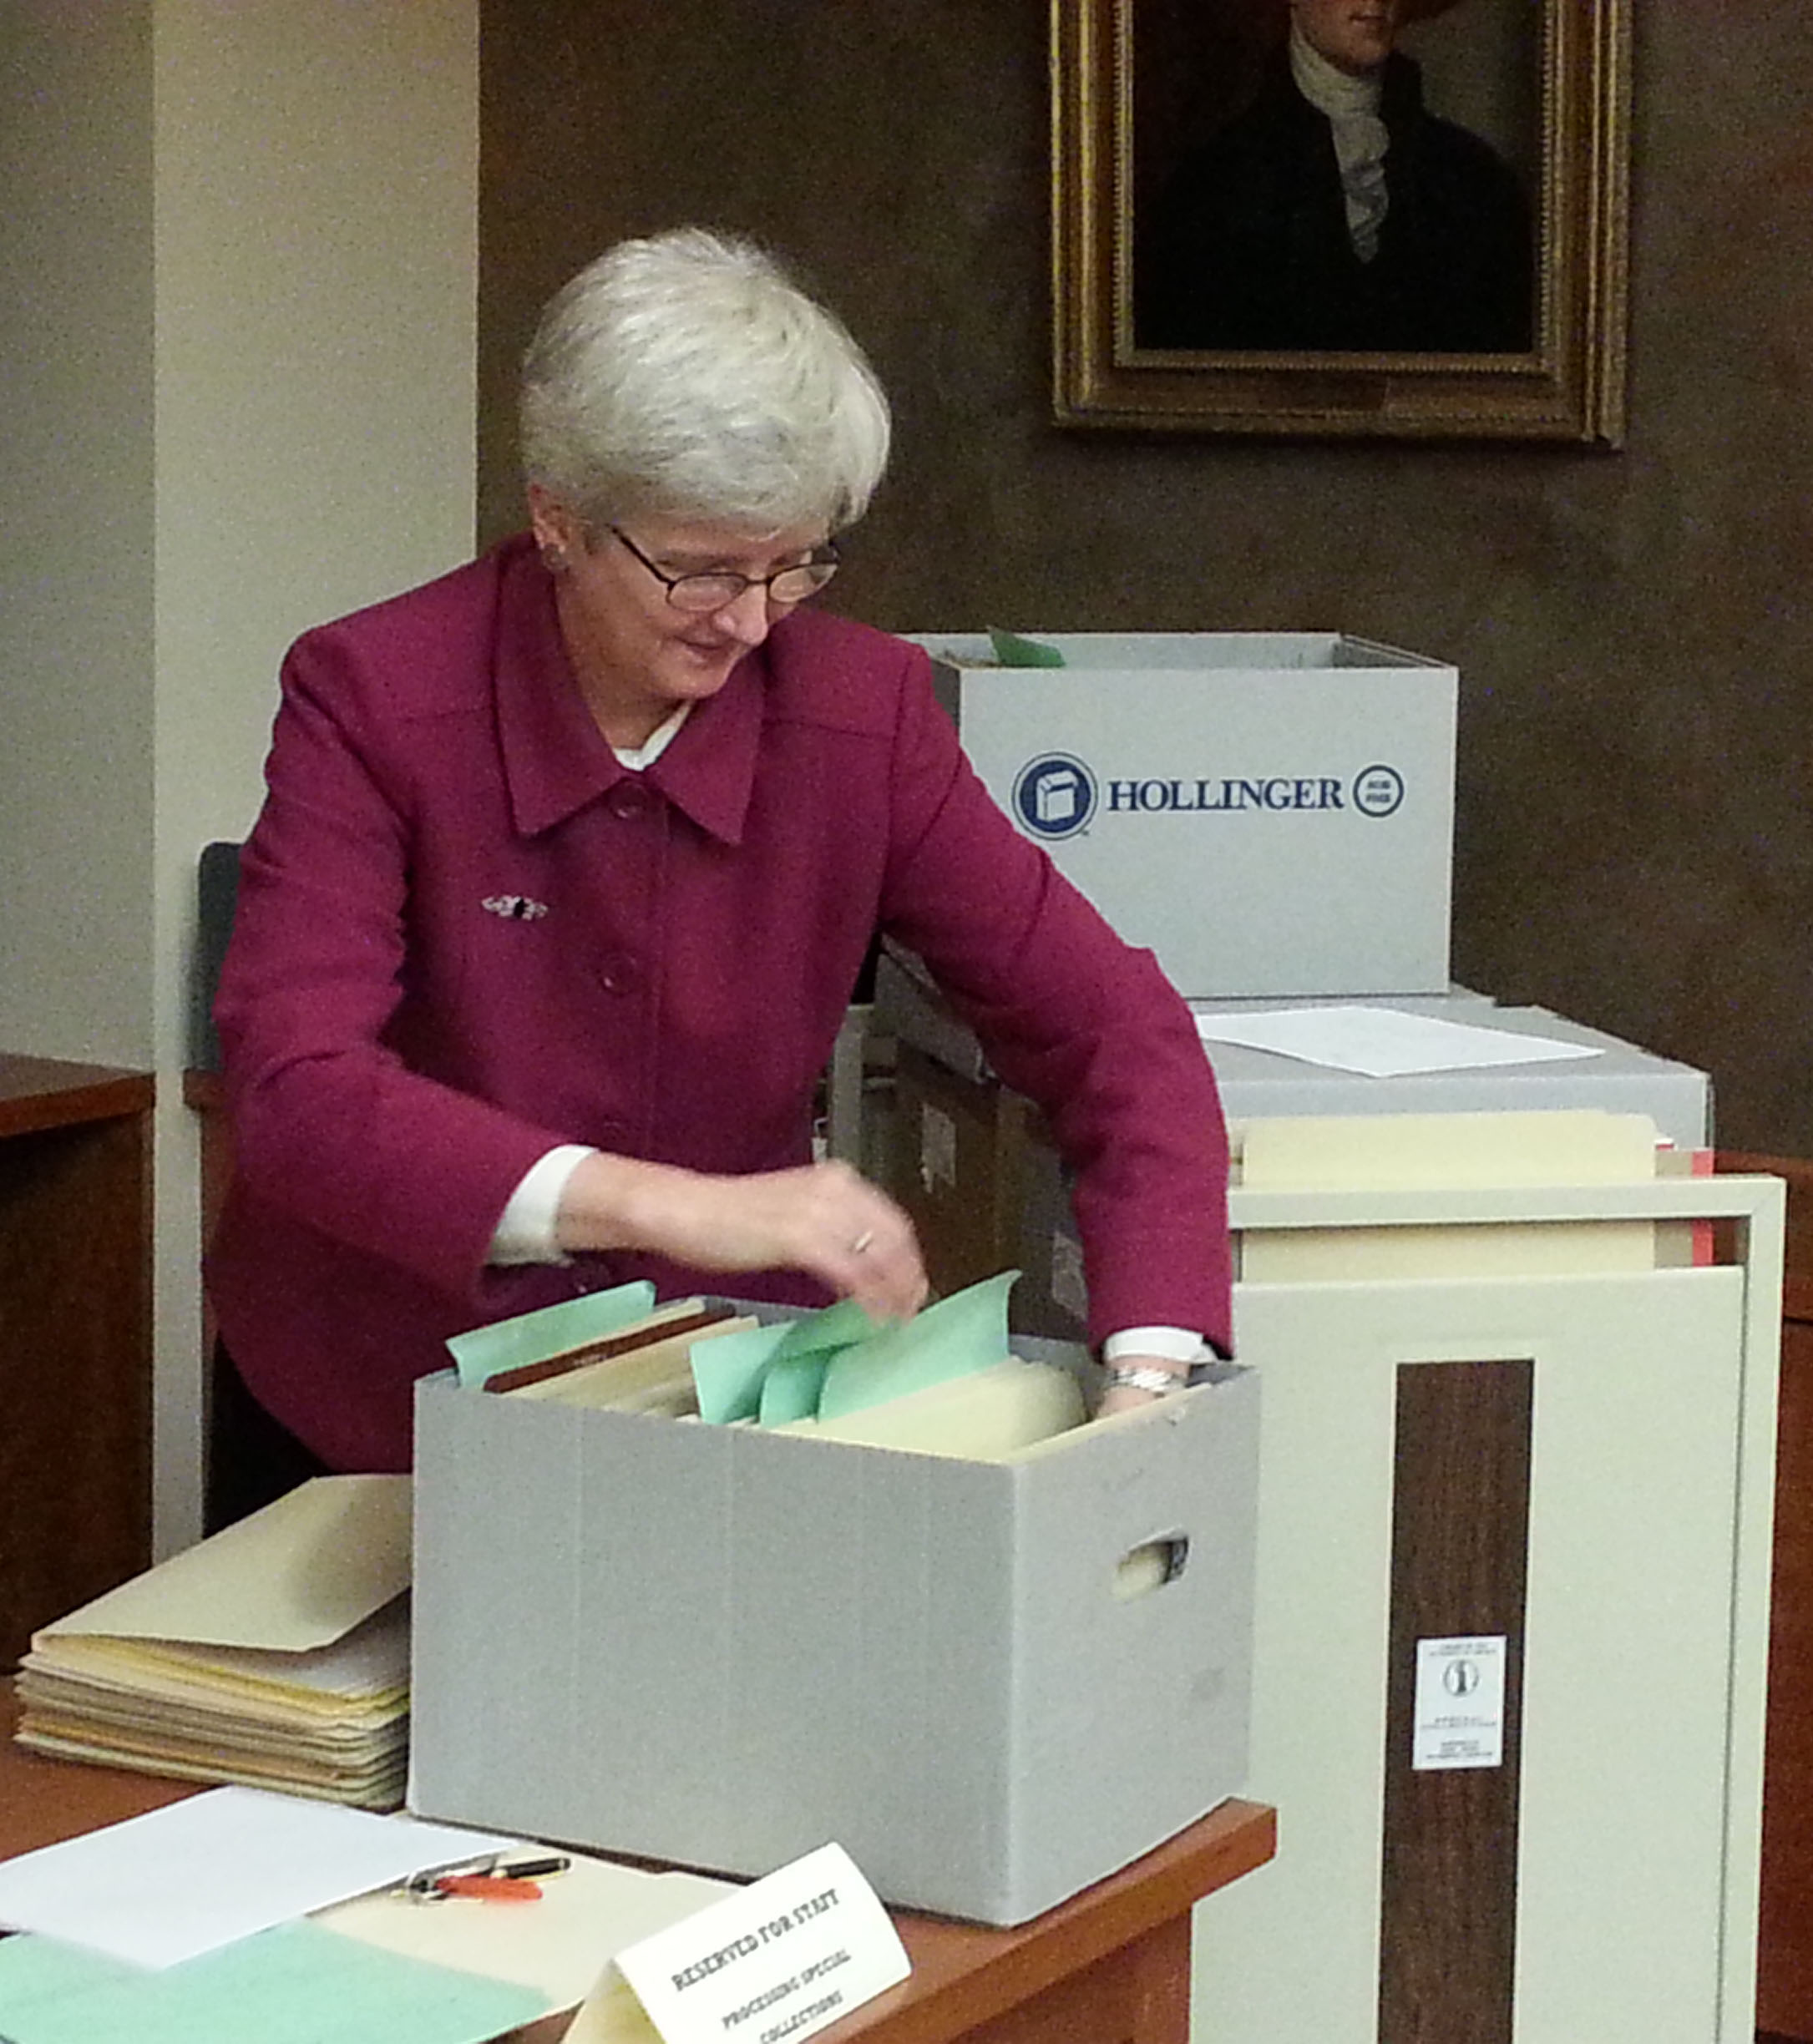 Professor Parshall hard at work. Not only did she organize all the materials, she rehoused the entire collection, replacing dusty old file folders and boxes with fresh archival ones.